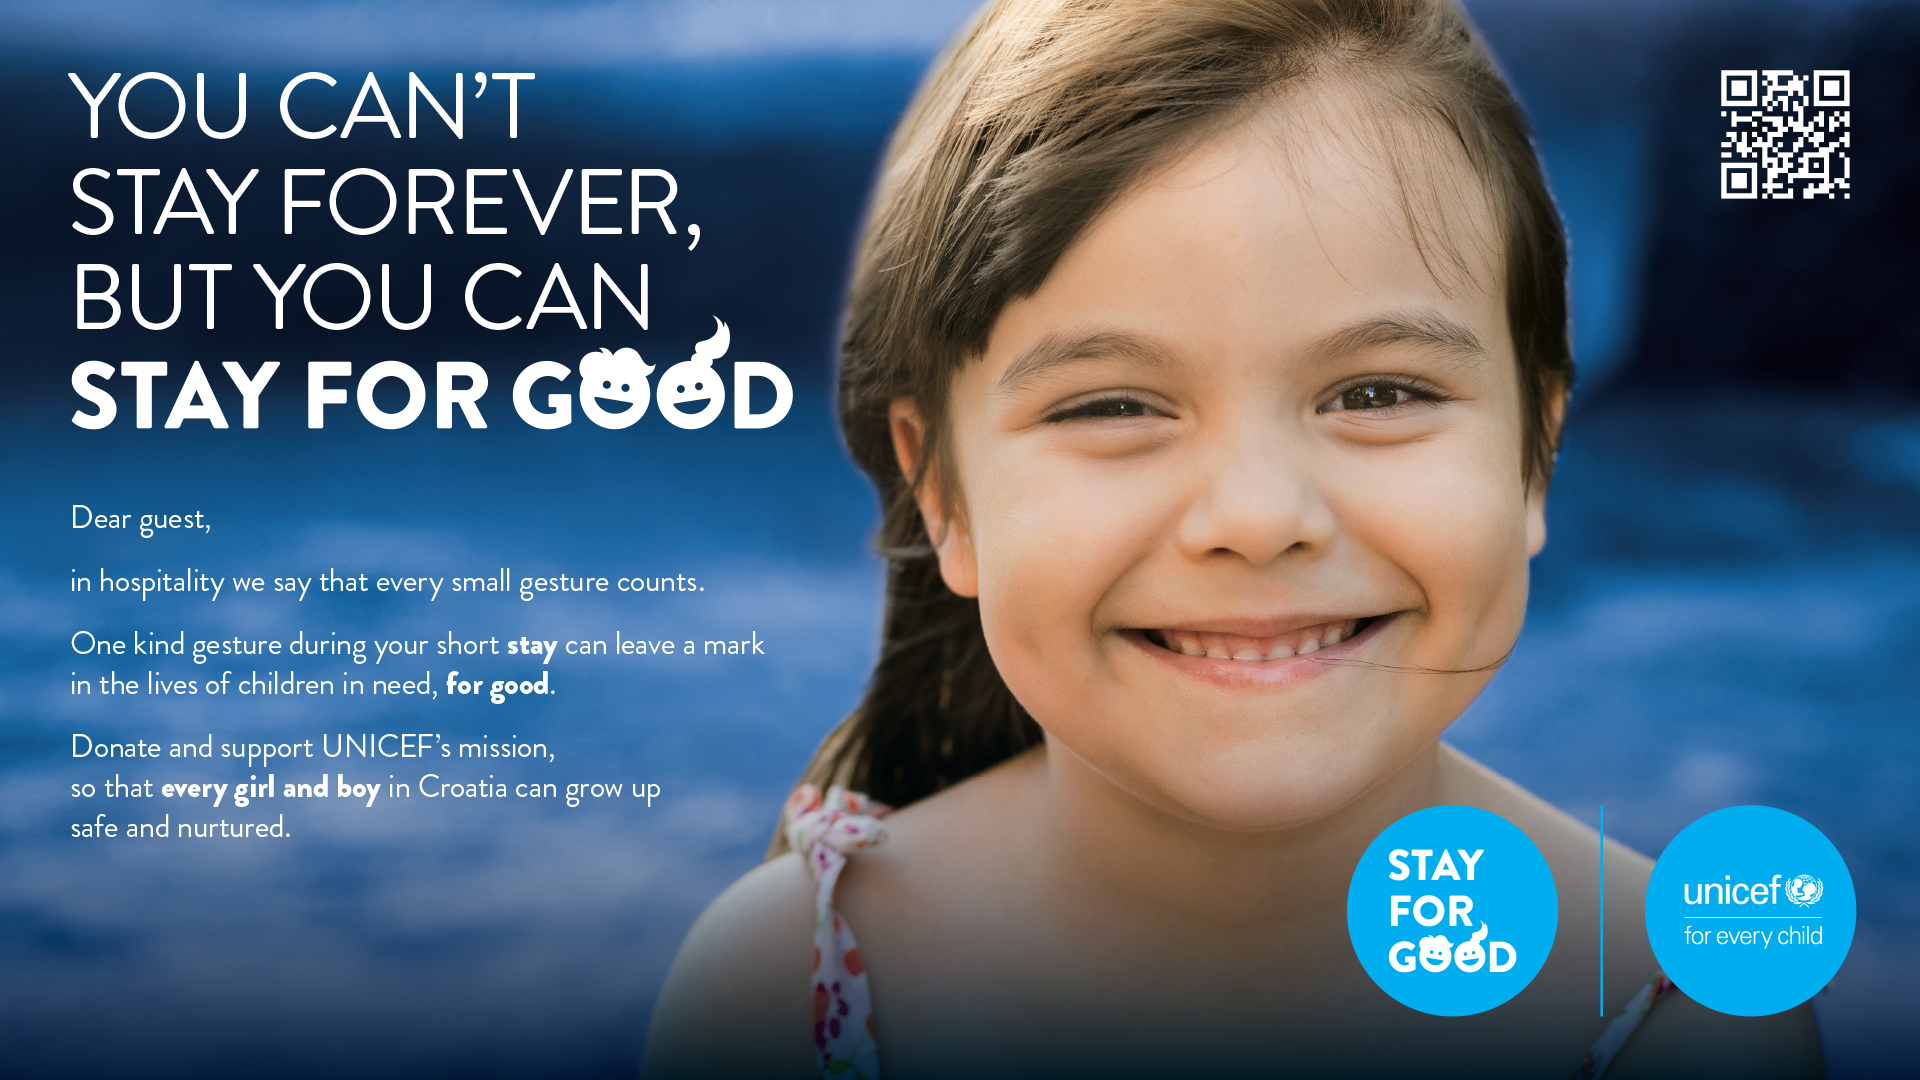 Unicef - Stay for good